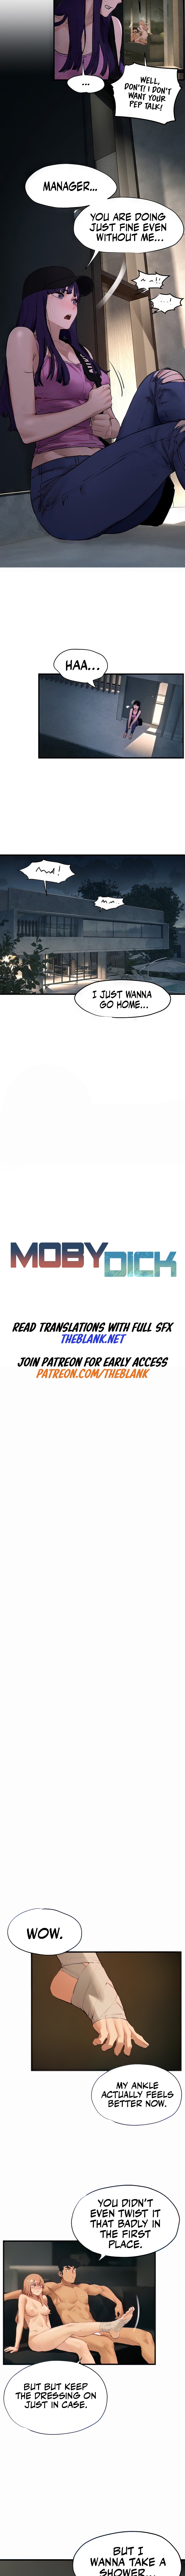 Moby Dick NEW image